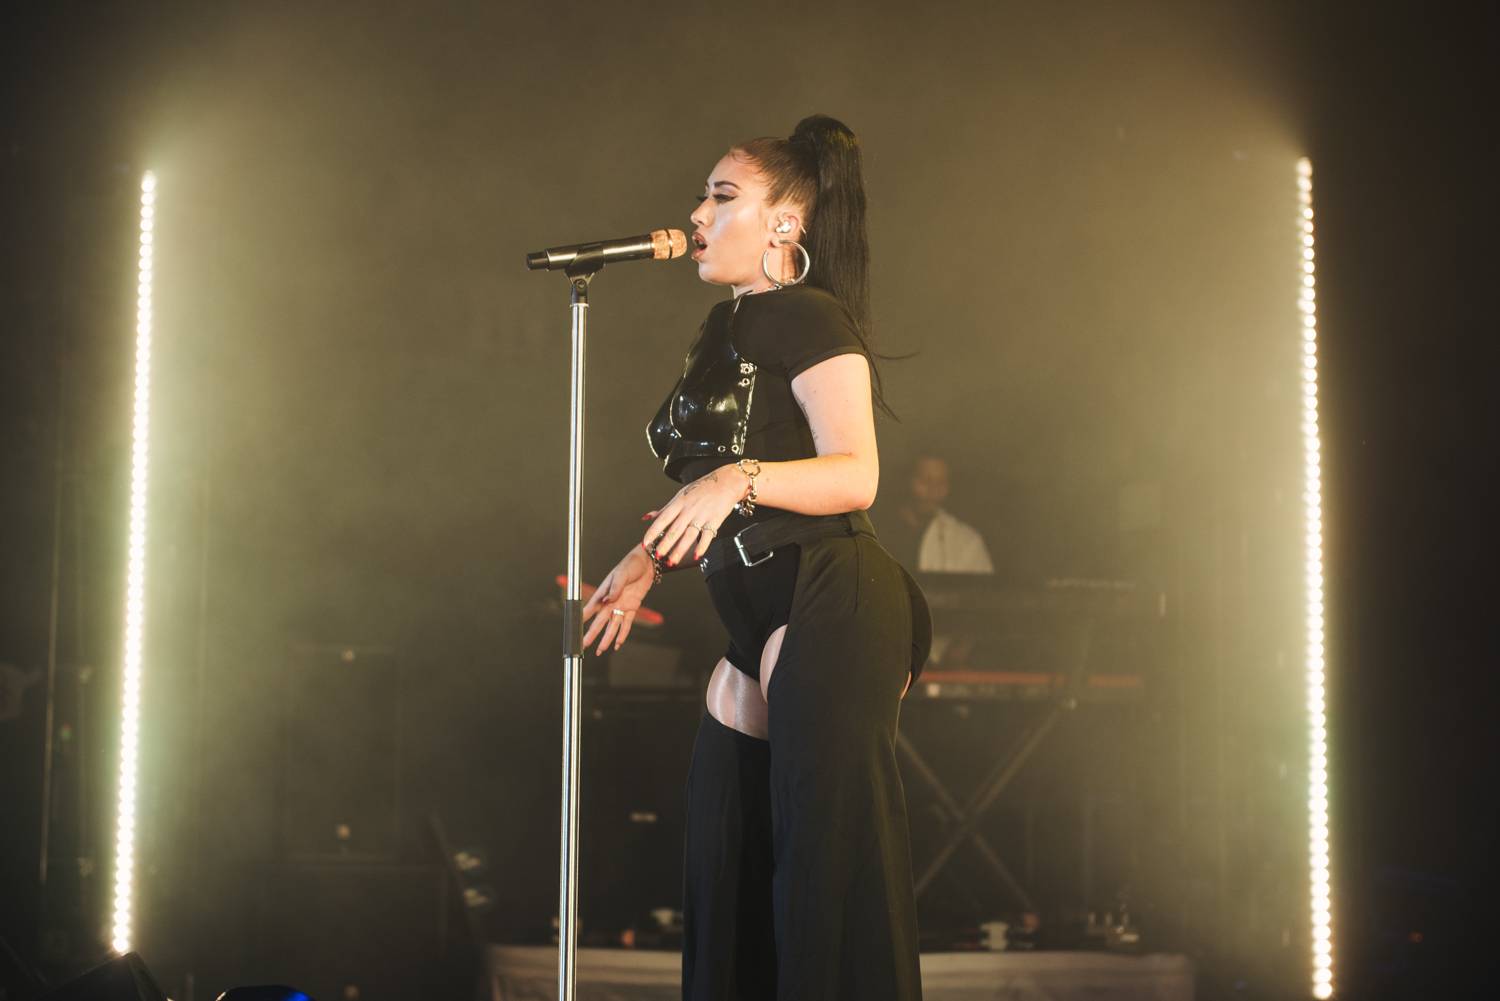 Kali Uchis At The Pne Forum The Snipe News